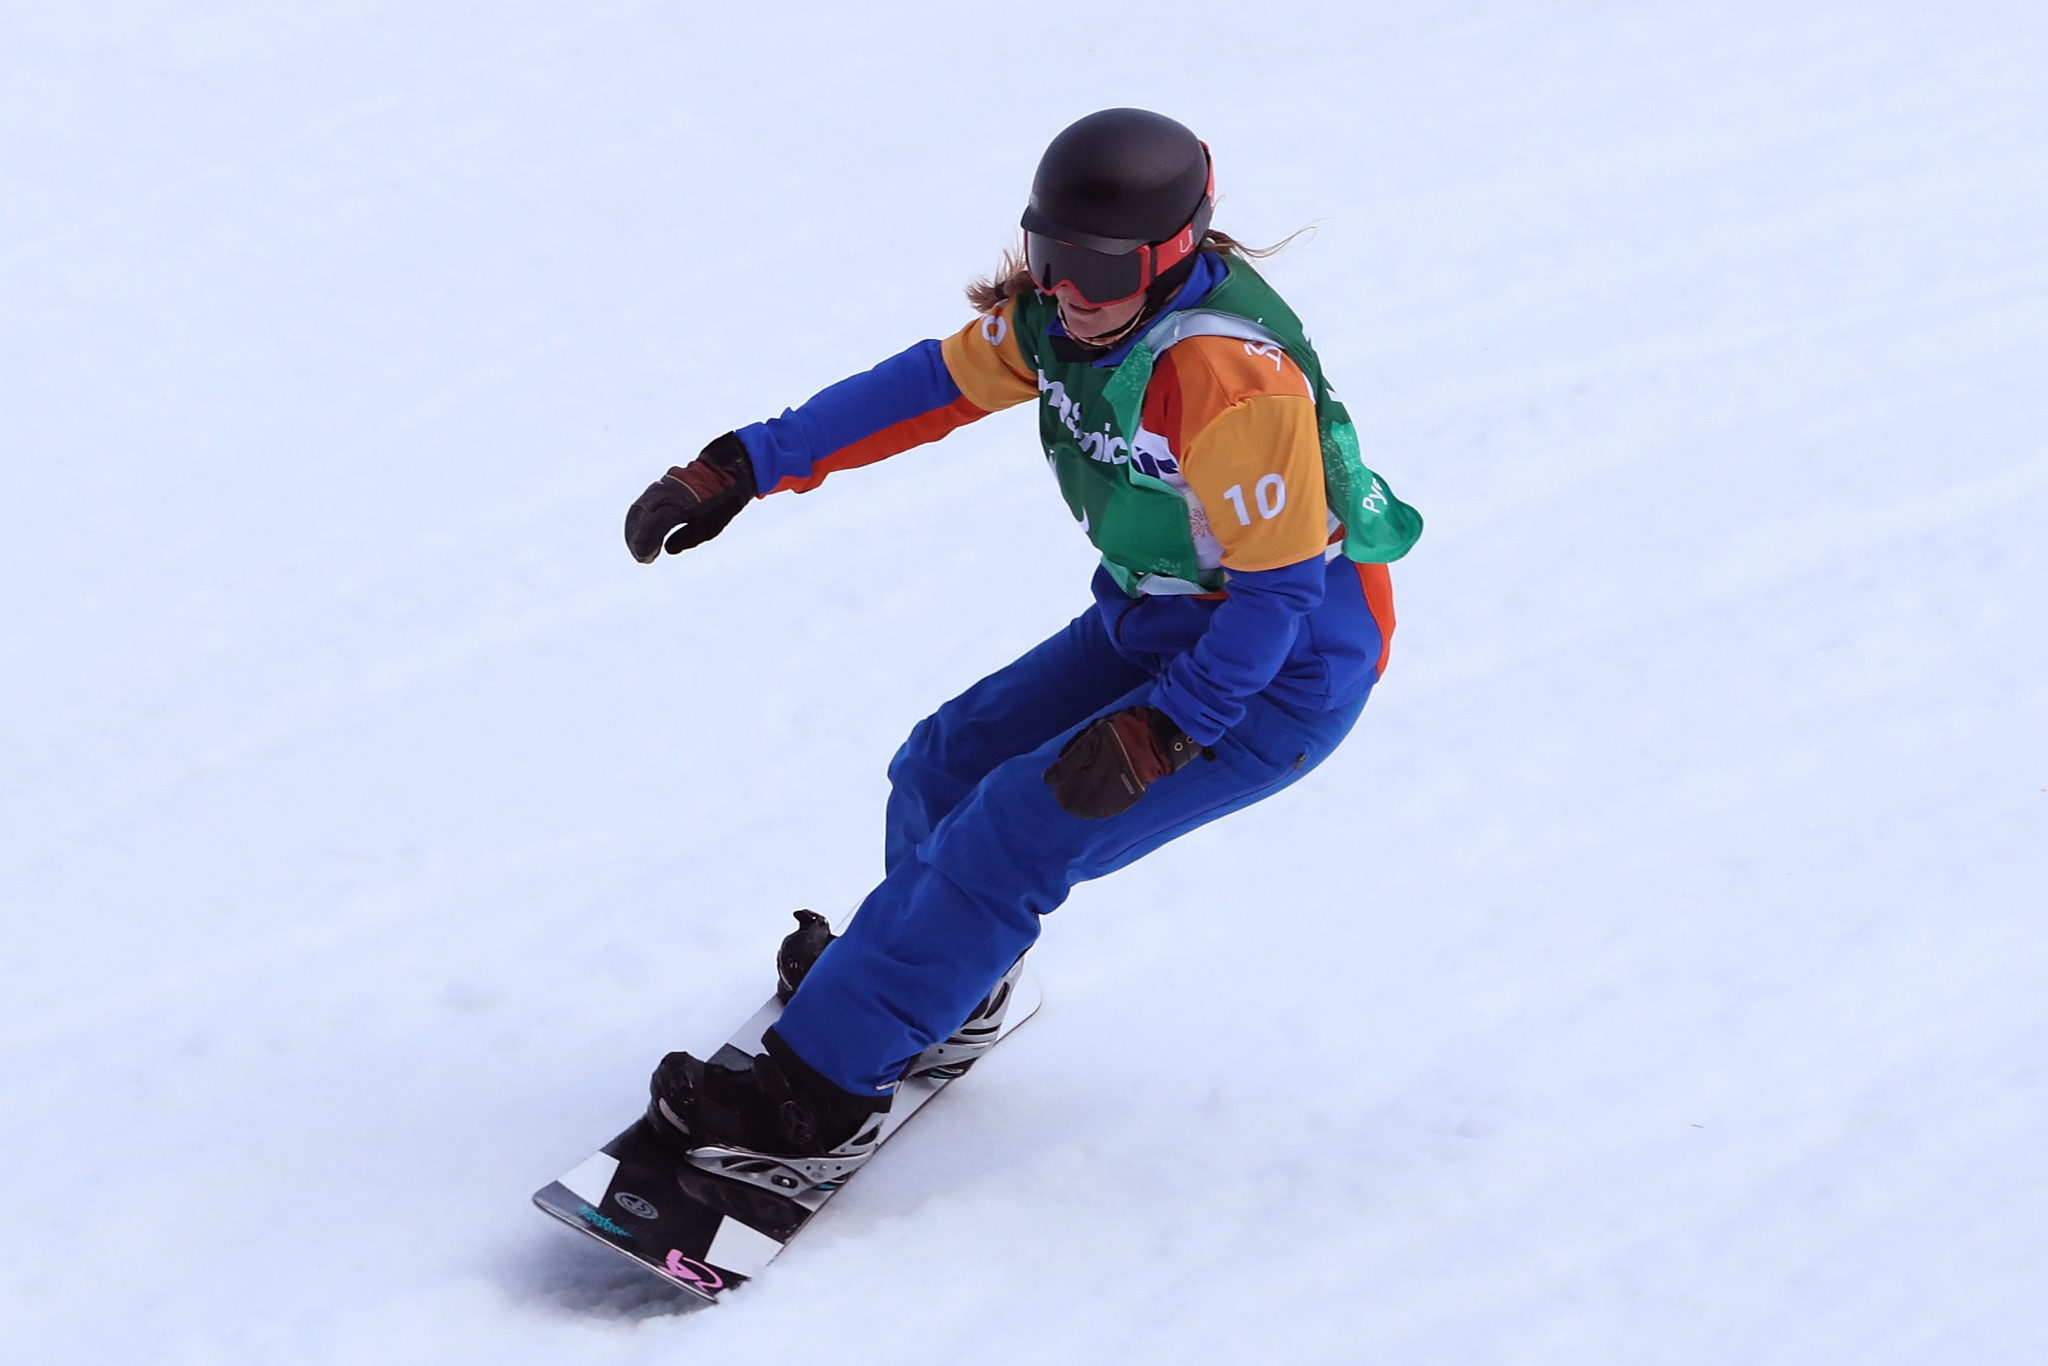 Spain's Astrid Fina Paredes will be aiming to continue her good form when she competes in front of a home crowd at the World Para Snowboard World Cup in La Molina this week ©Getty Images